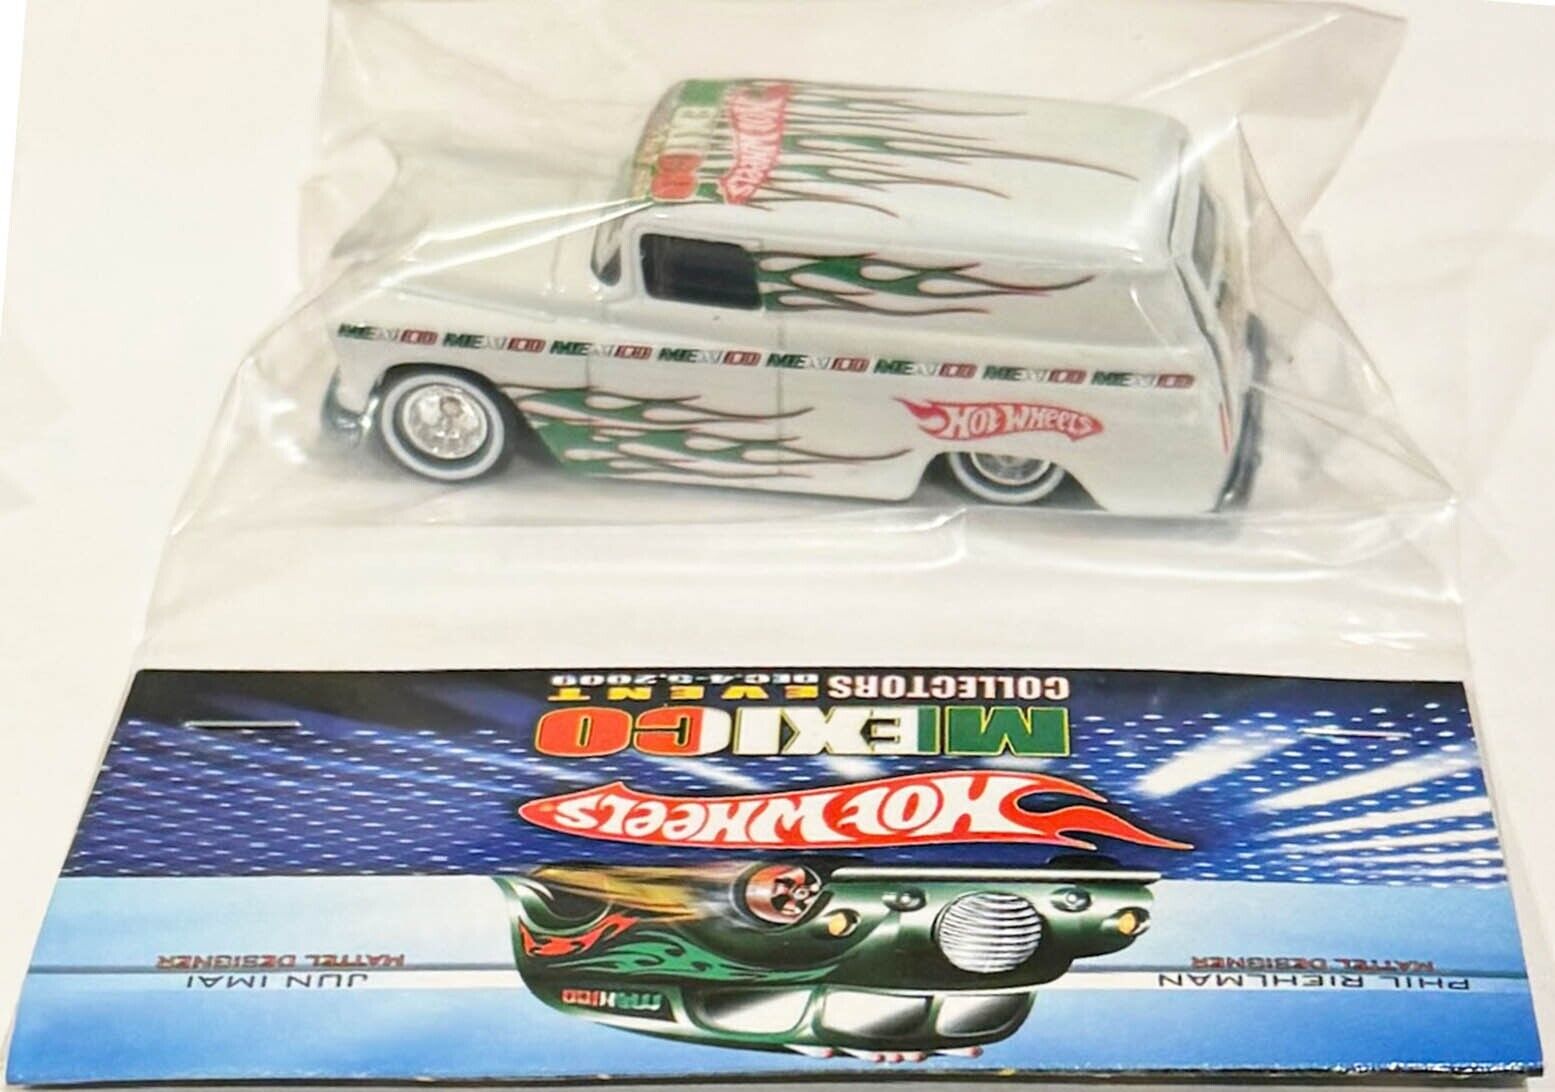 White '55 CHEVY PANEL TRUCK Mexico 2009 Convention Code-3 Hot Wheels Car